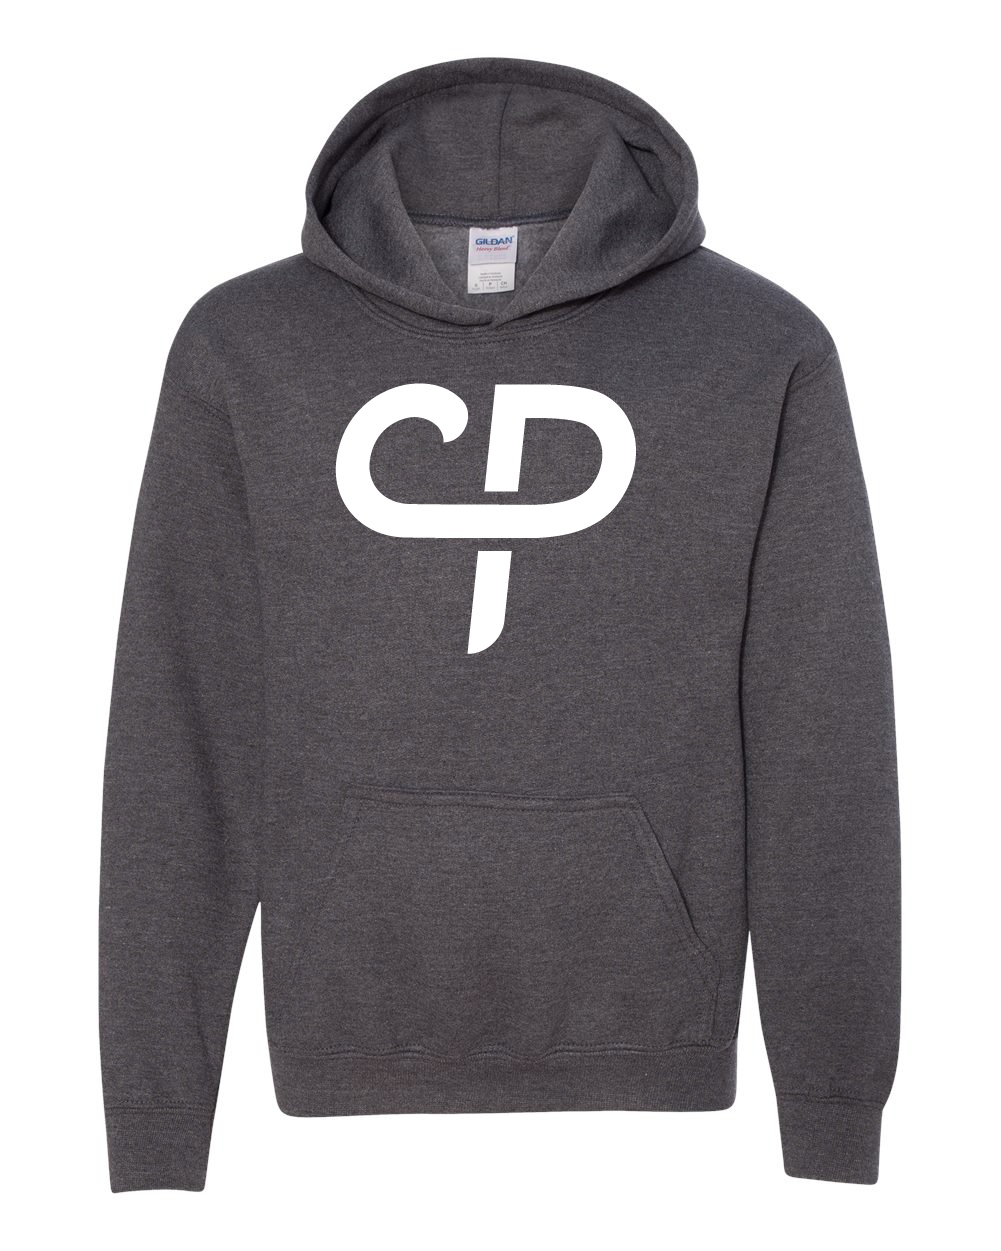 Dark heather gray youth child's pickleball hoodie hooded sweater with white CP Parenteau logo on front